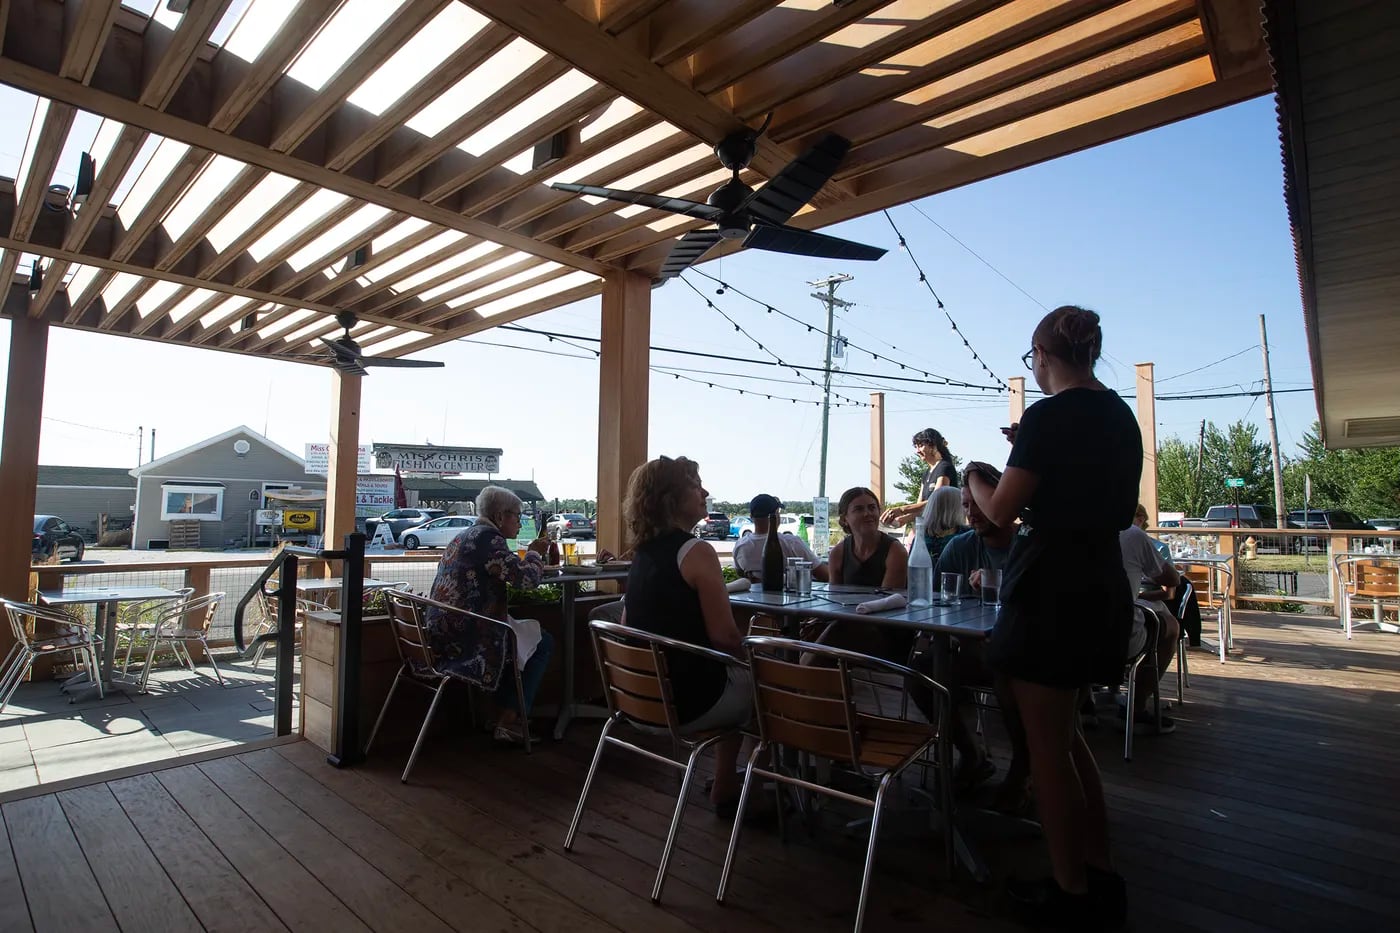 A new outdoor patio for diners at Mayer's Tavern.